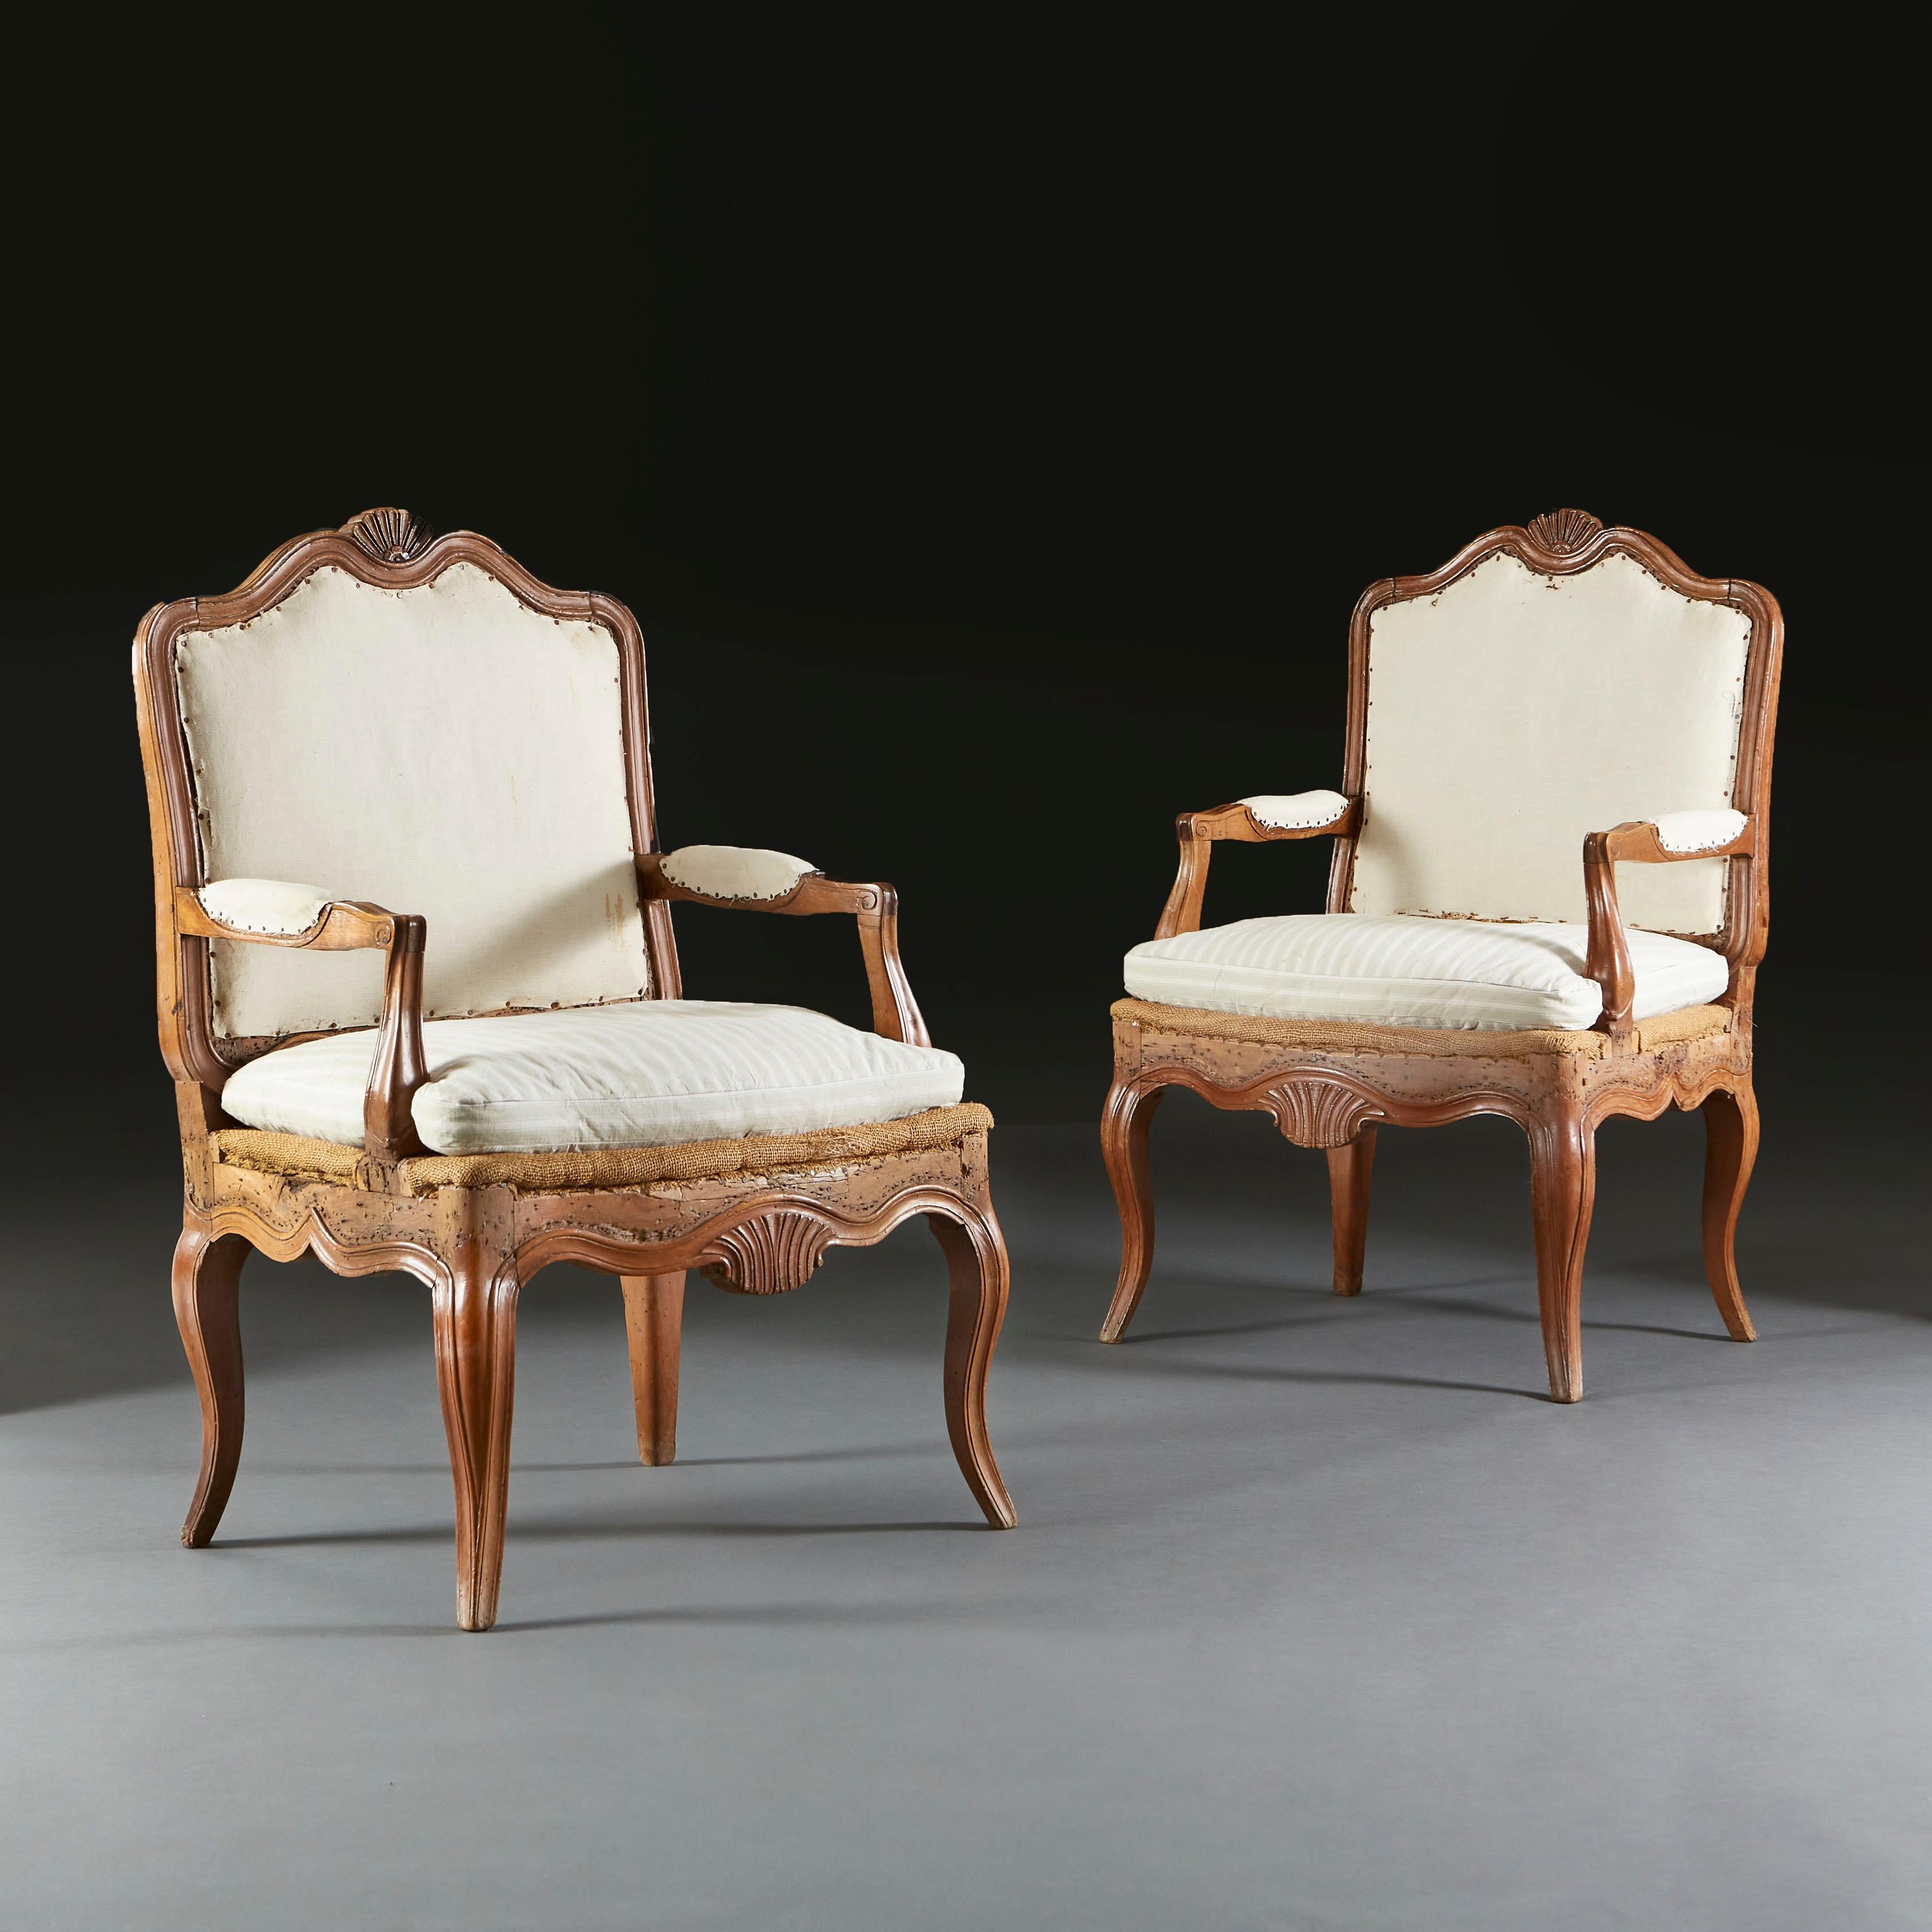 A pair of early nineteenth century walnut open armchairs with carved shells to the back seat rail, upholstered seats, all supported on four cabriole legs.